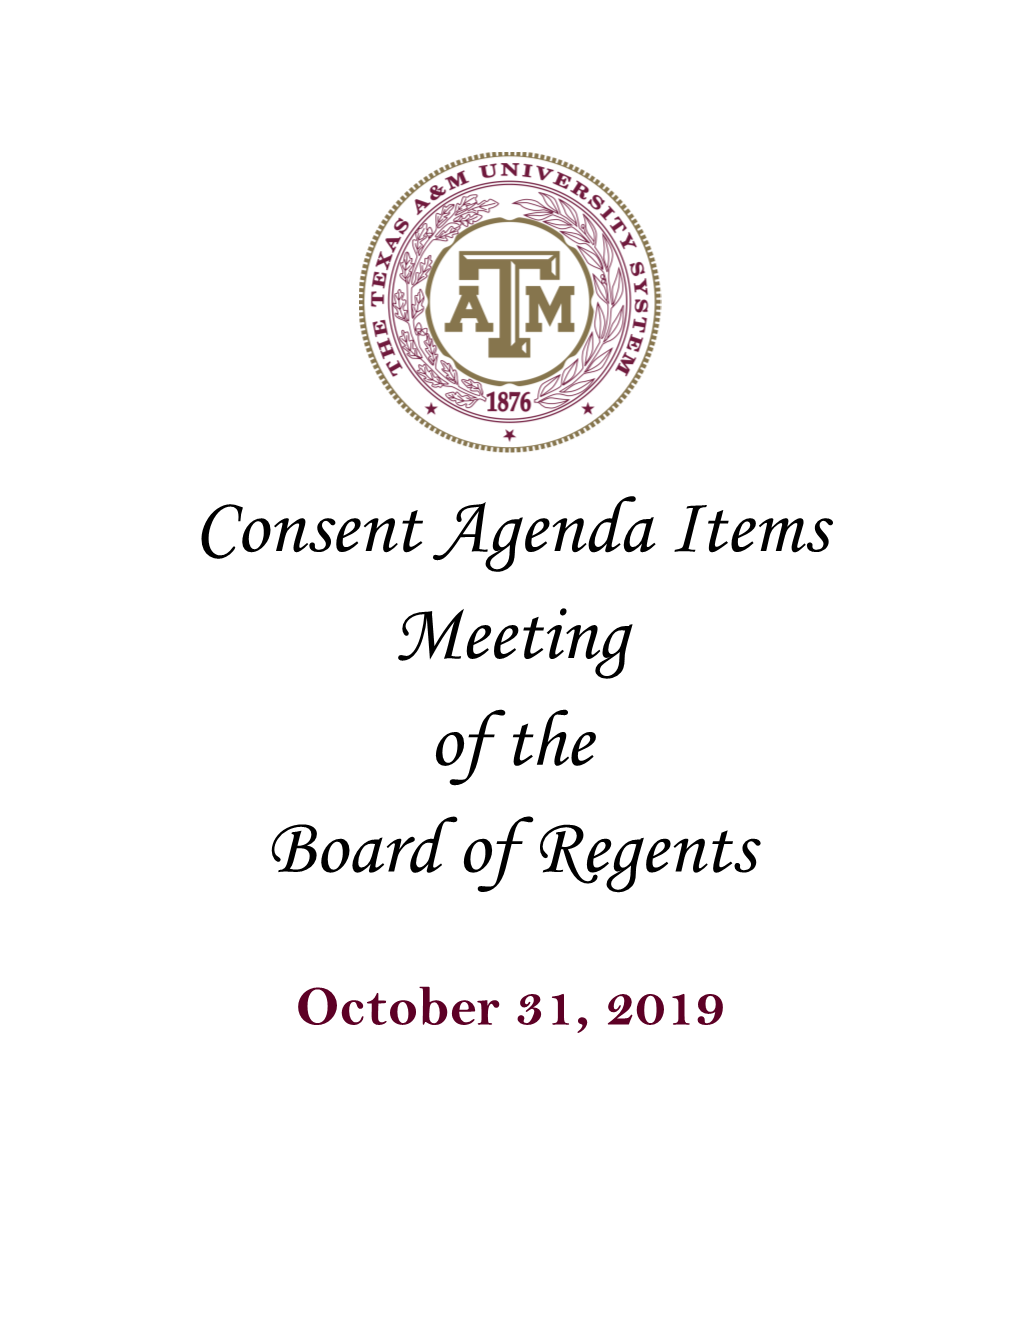 Consent Agenda Items Meeting of the Board of Regents